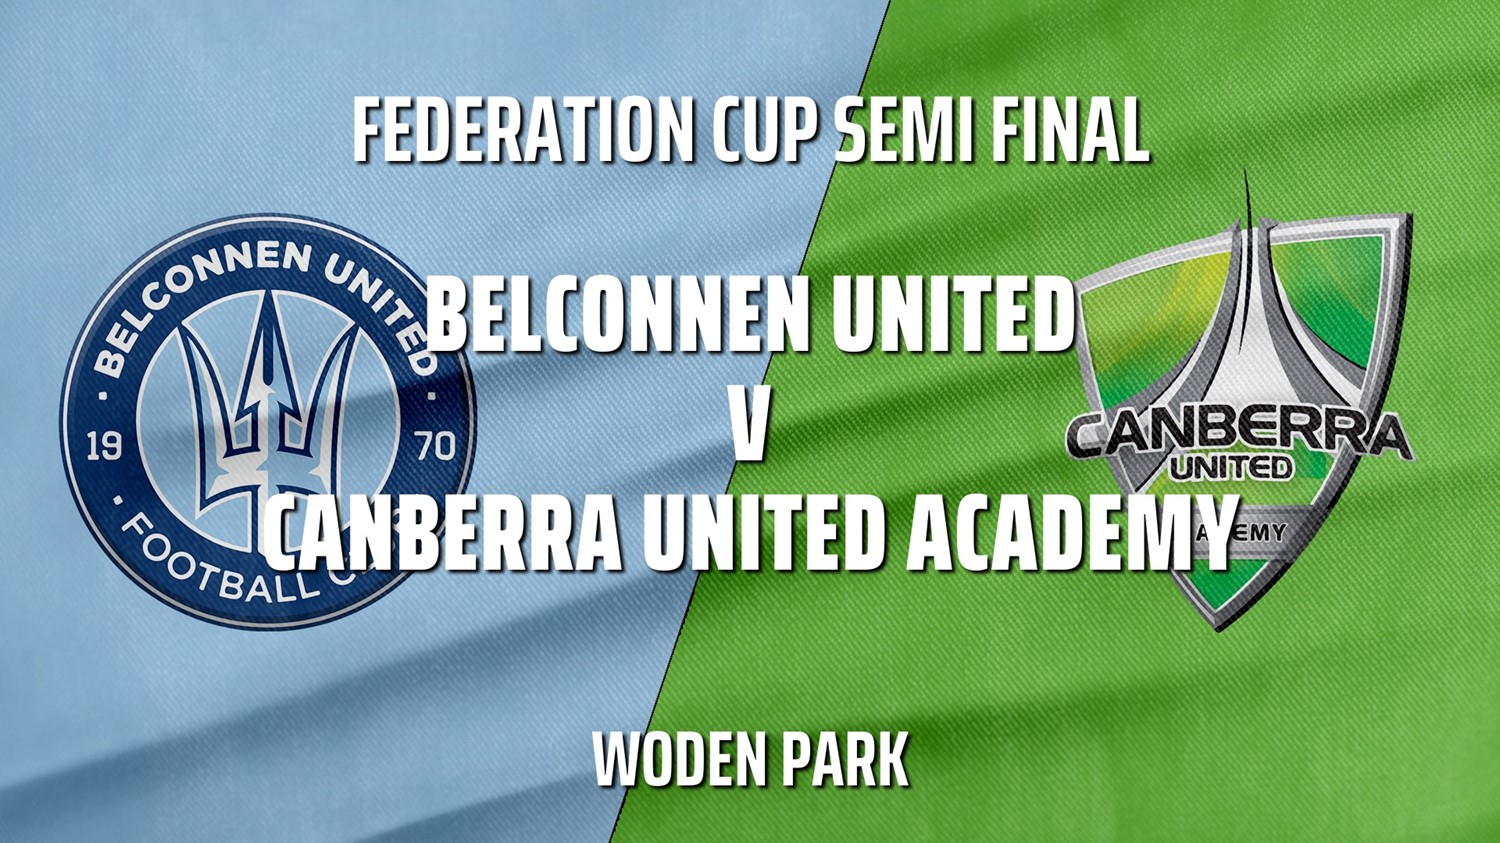 220511-Federation Cup Semi Final - Belconnen United (women) v Canberra United Academy Minigame Slate Image